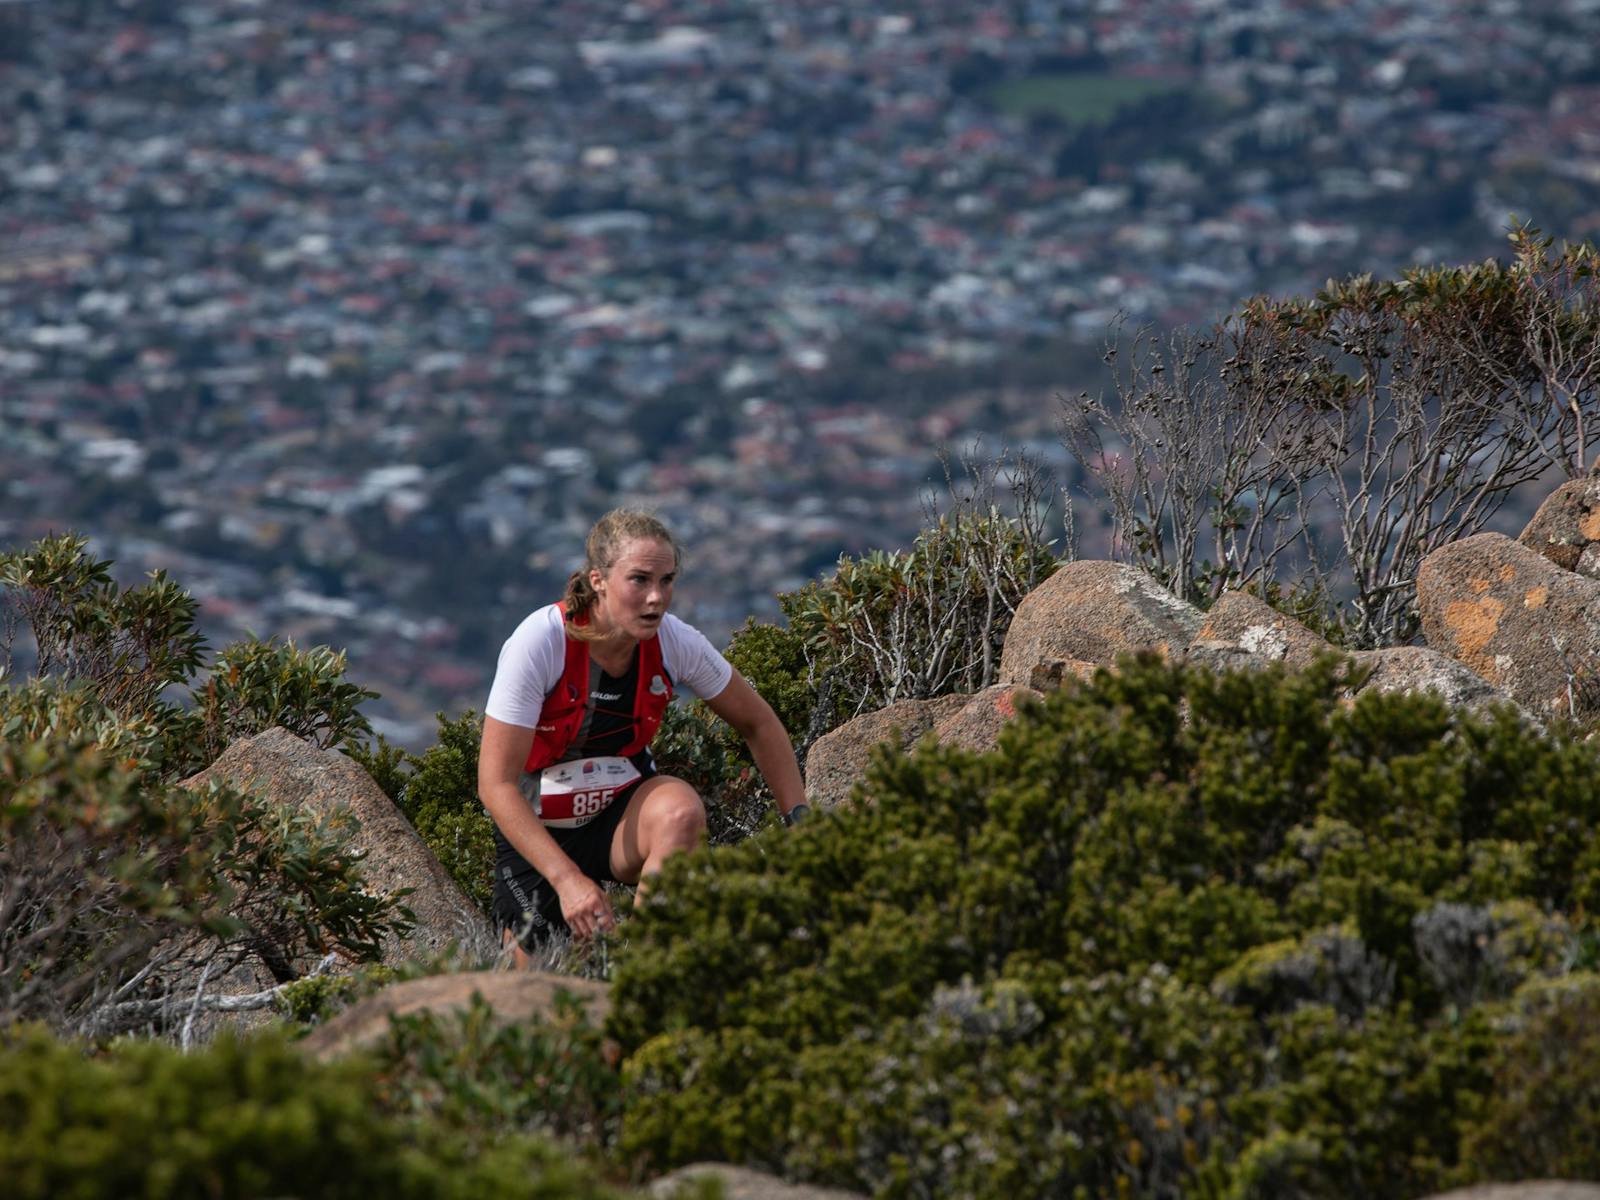 A runner navigates vegetation and rocks with Hobart in the background